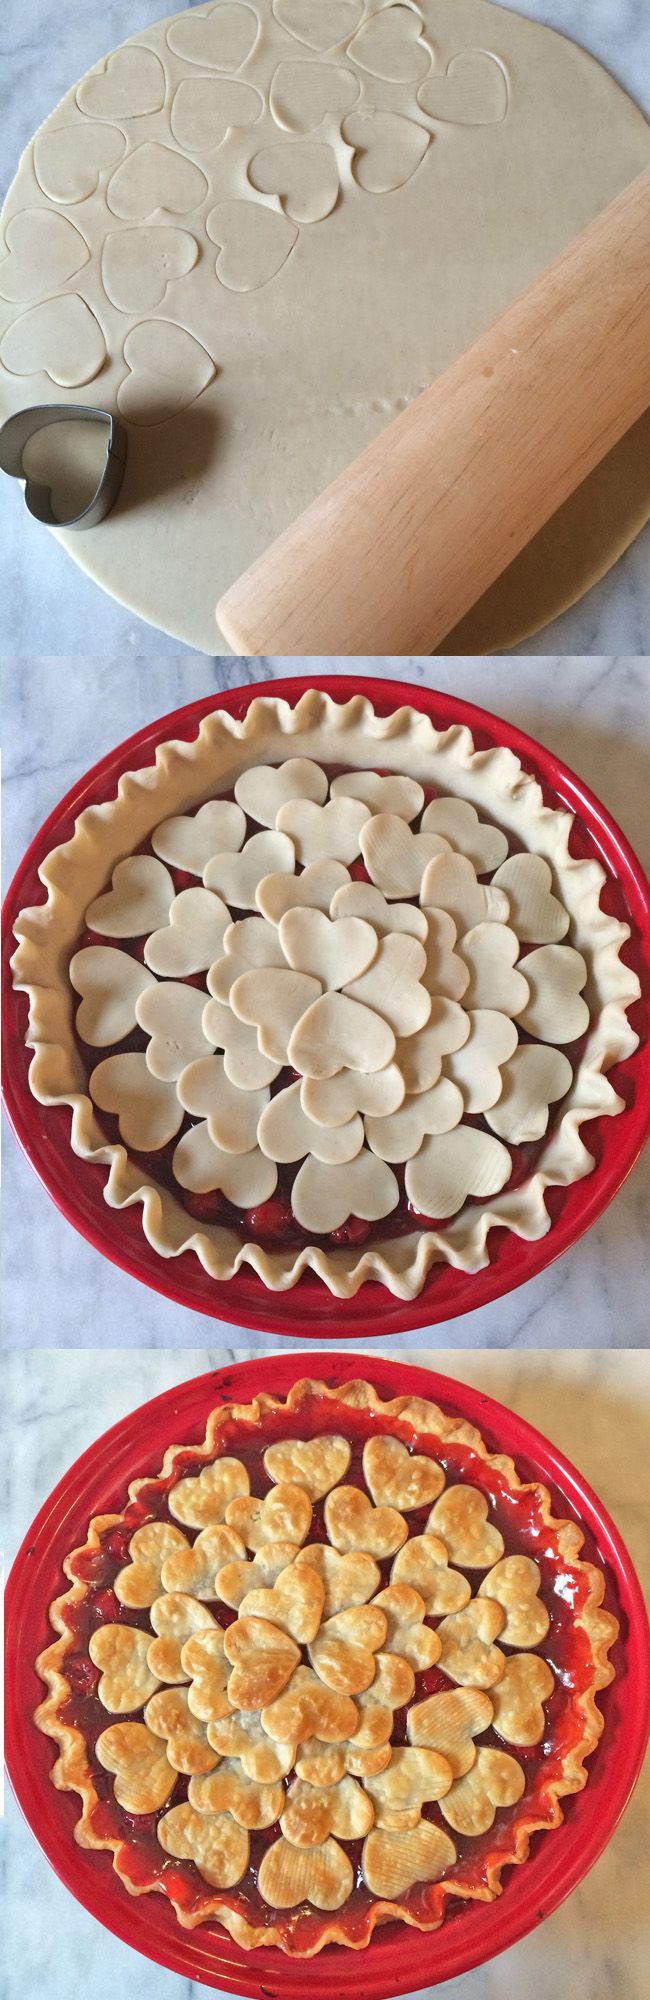 Heart pie! Click through for 35 amazing, over-the-top Valentine's Day ideas, including Valentine's crafts, Valentine's recipes, and Valentine's decorations, and more!